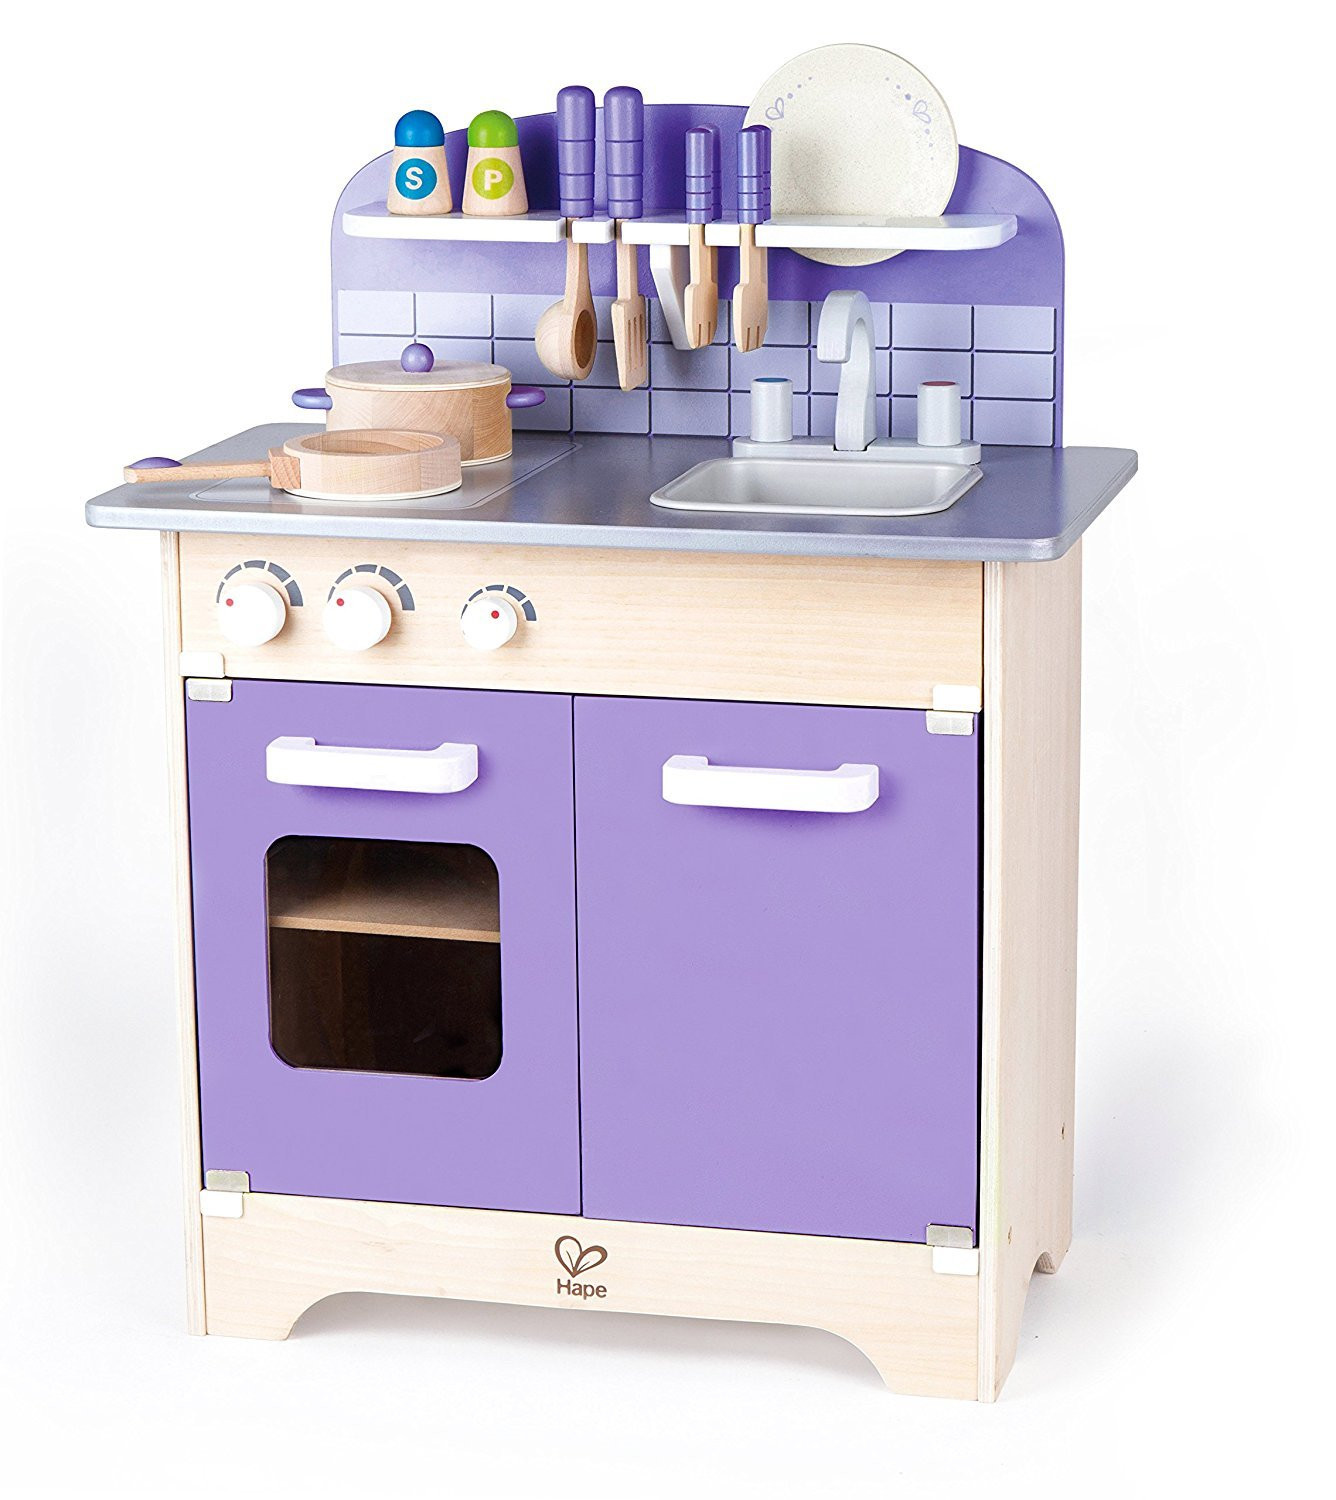 Small Wooden Play Kitchen
 10 Best Wooden Play Kitchens for Kids Top Toy Kitchens